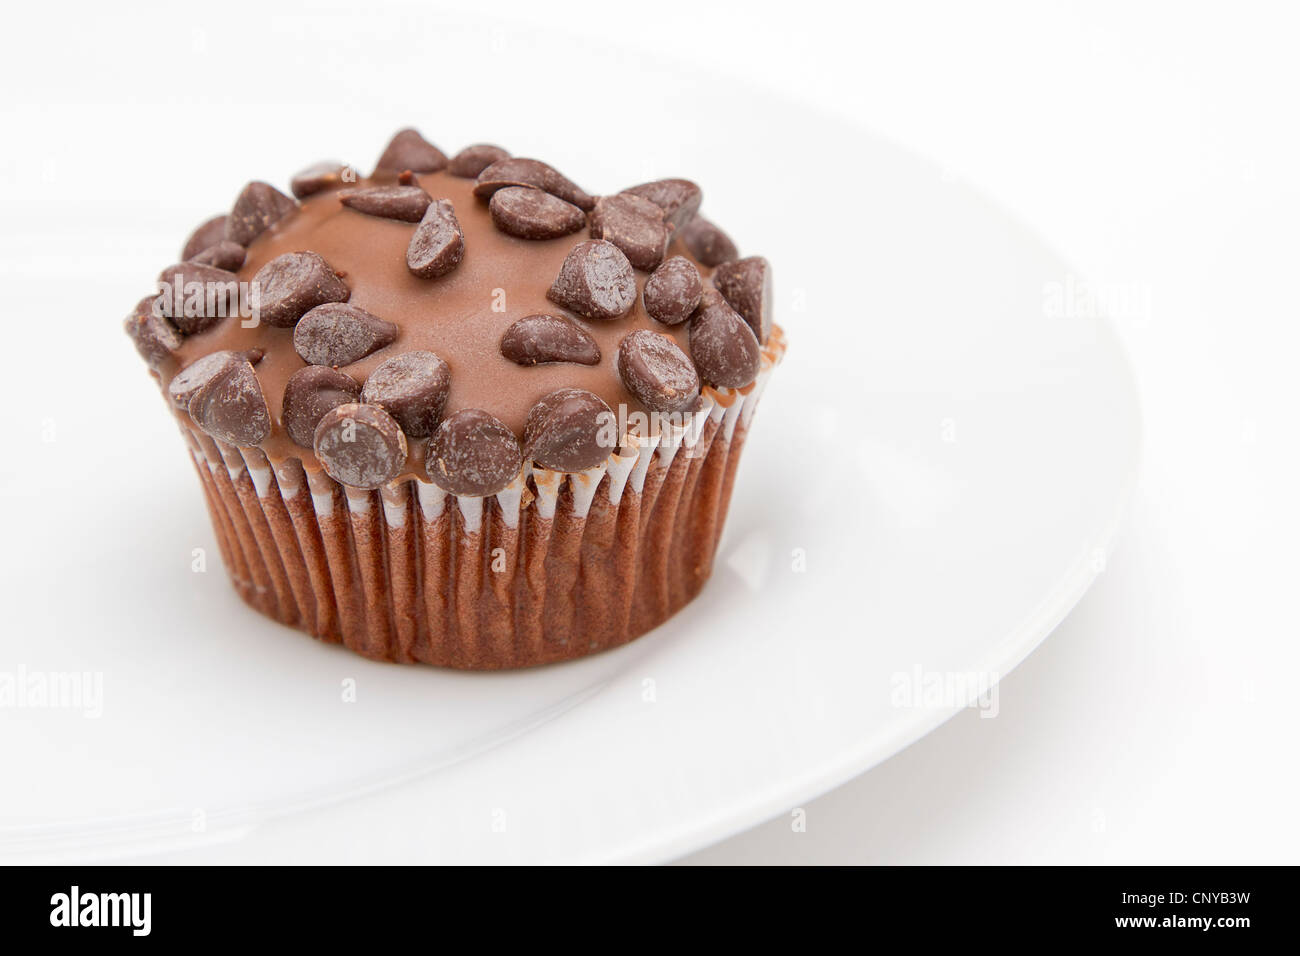 Chocolate chip cup cake on white plate Stock Photo